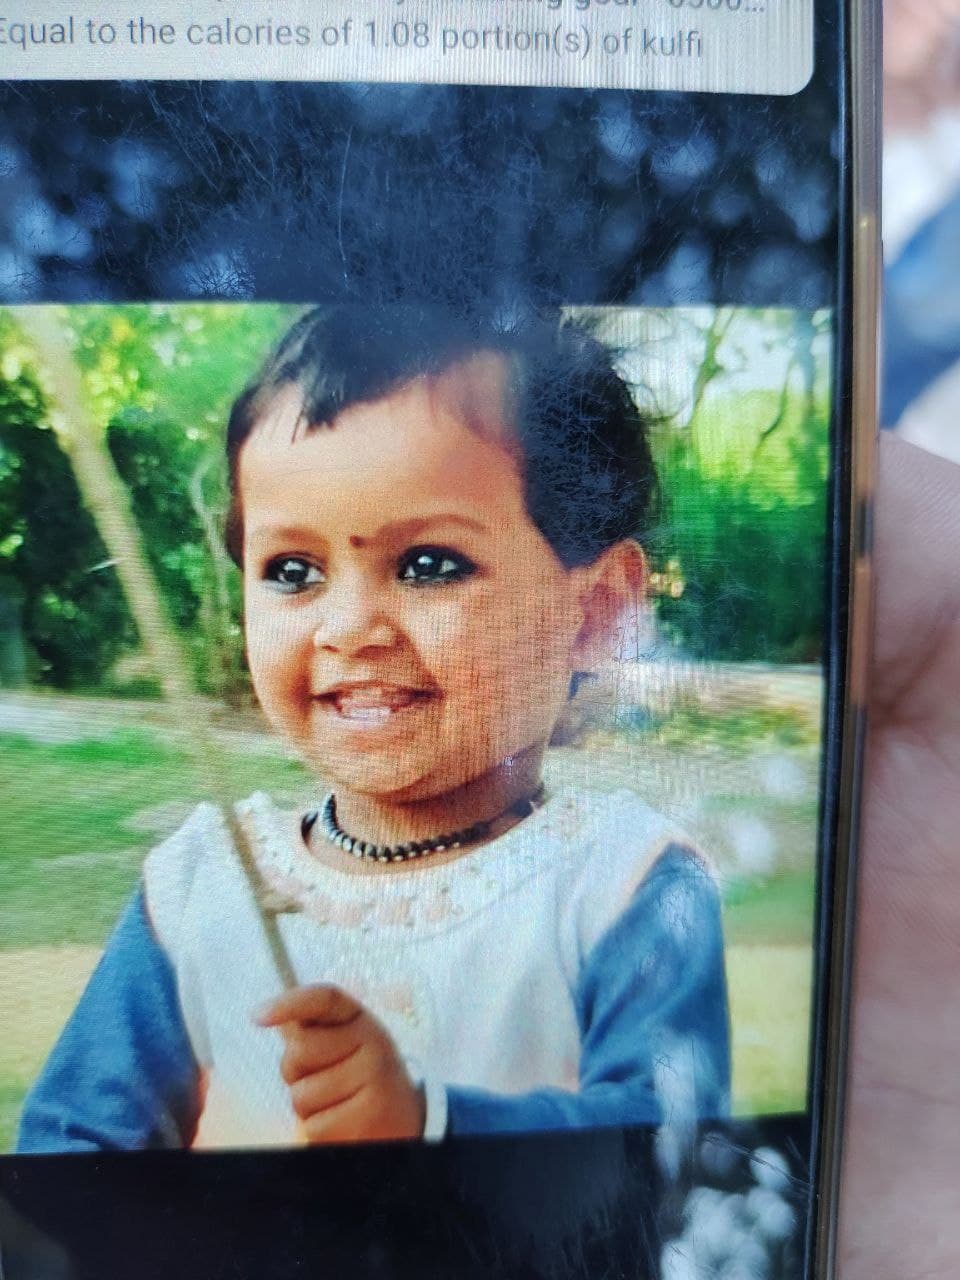 Two-year-old kidnapped, brutally strangled to murder